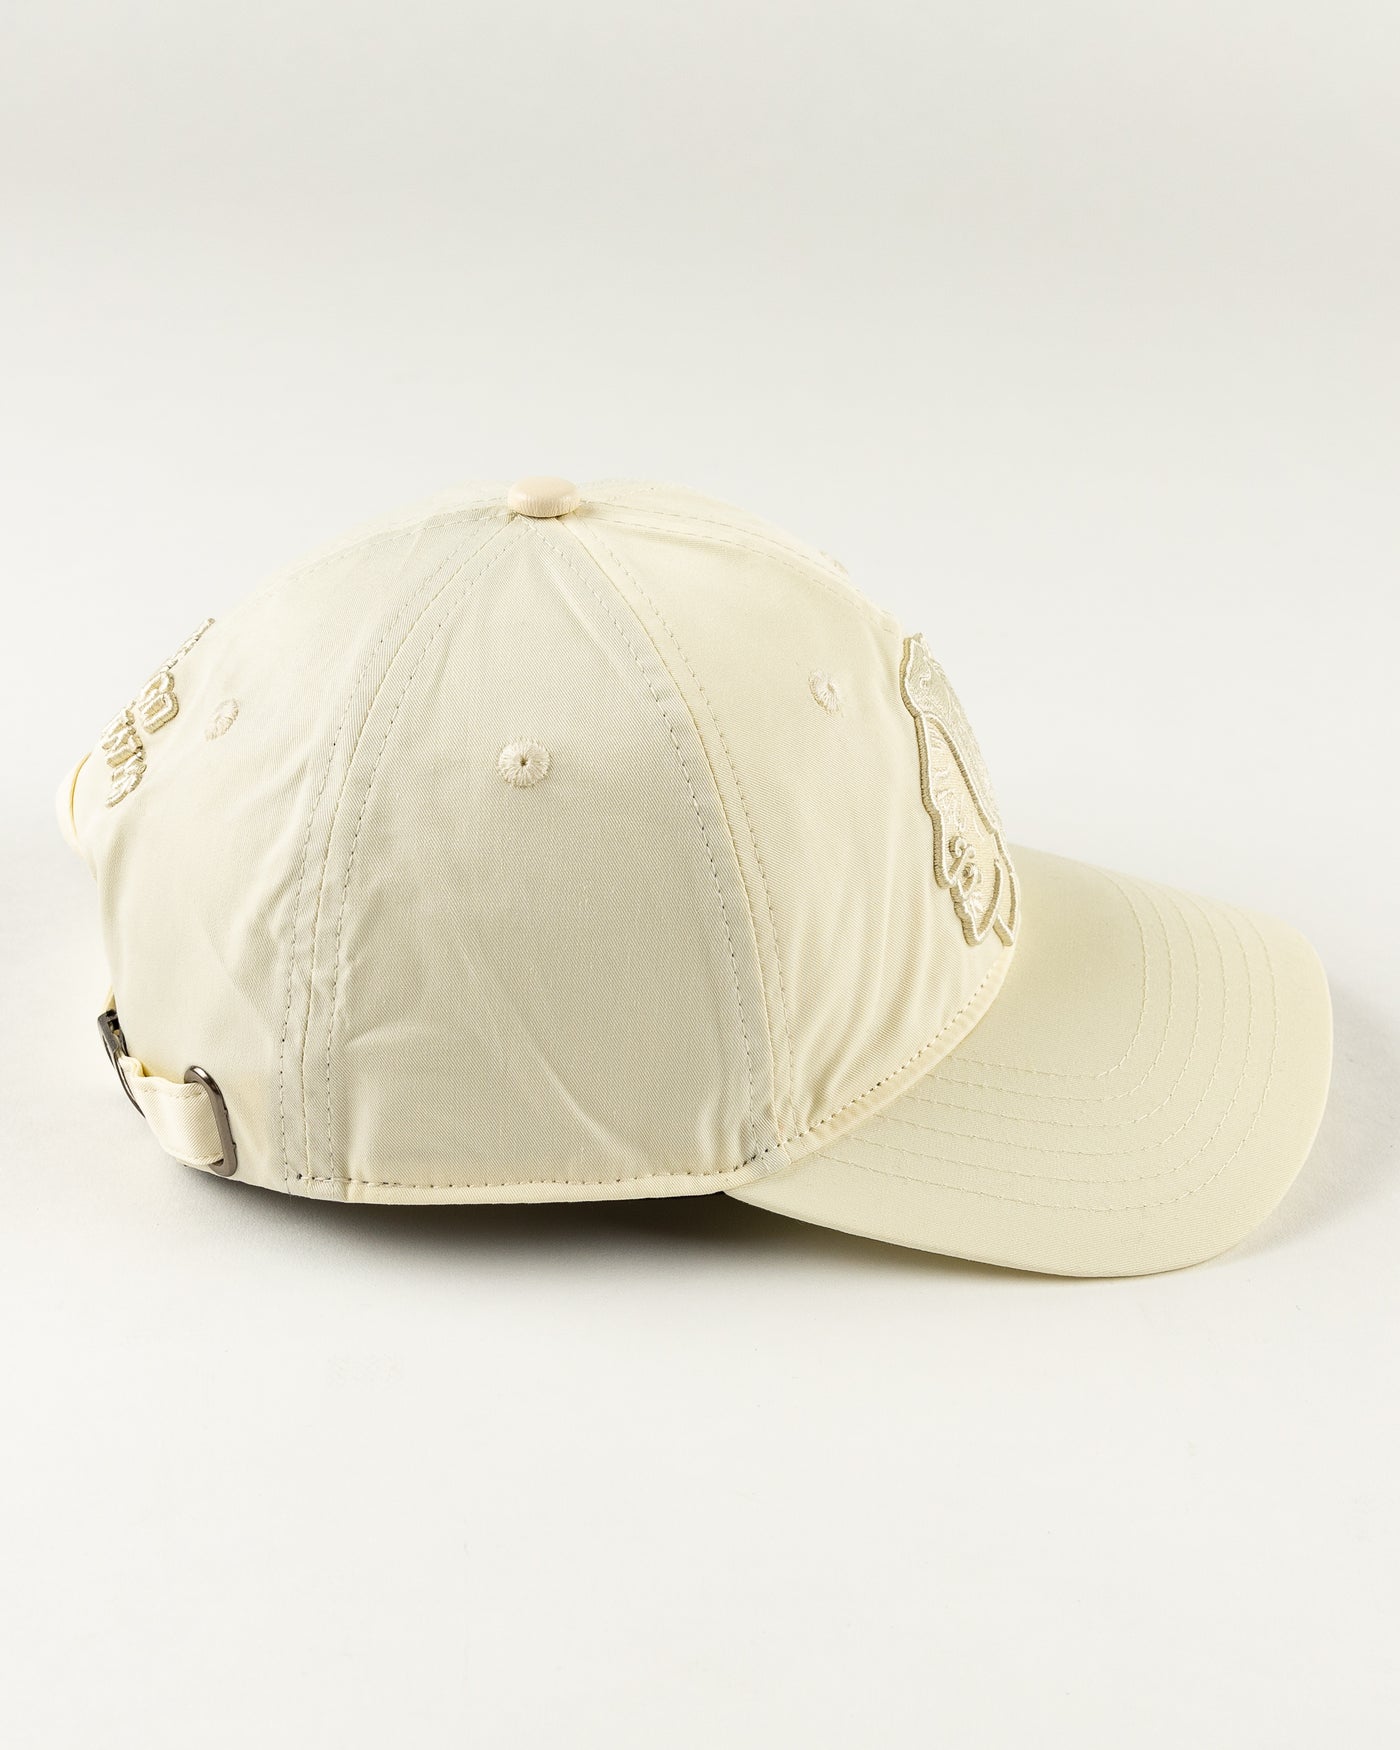 all eggshell adjustable cap with tonal Chicago Blackhawks primary logo embroidered on front - right side lay flat 